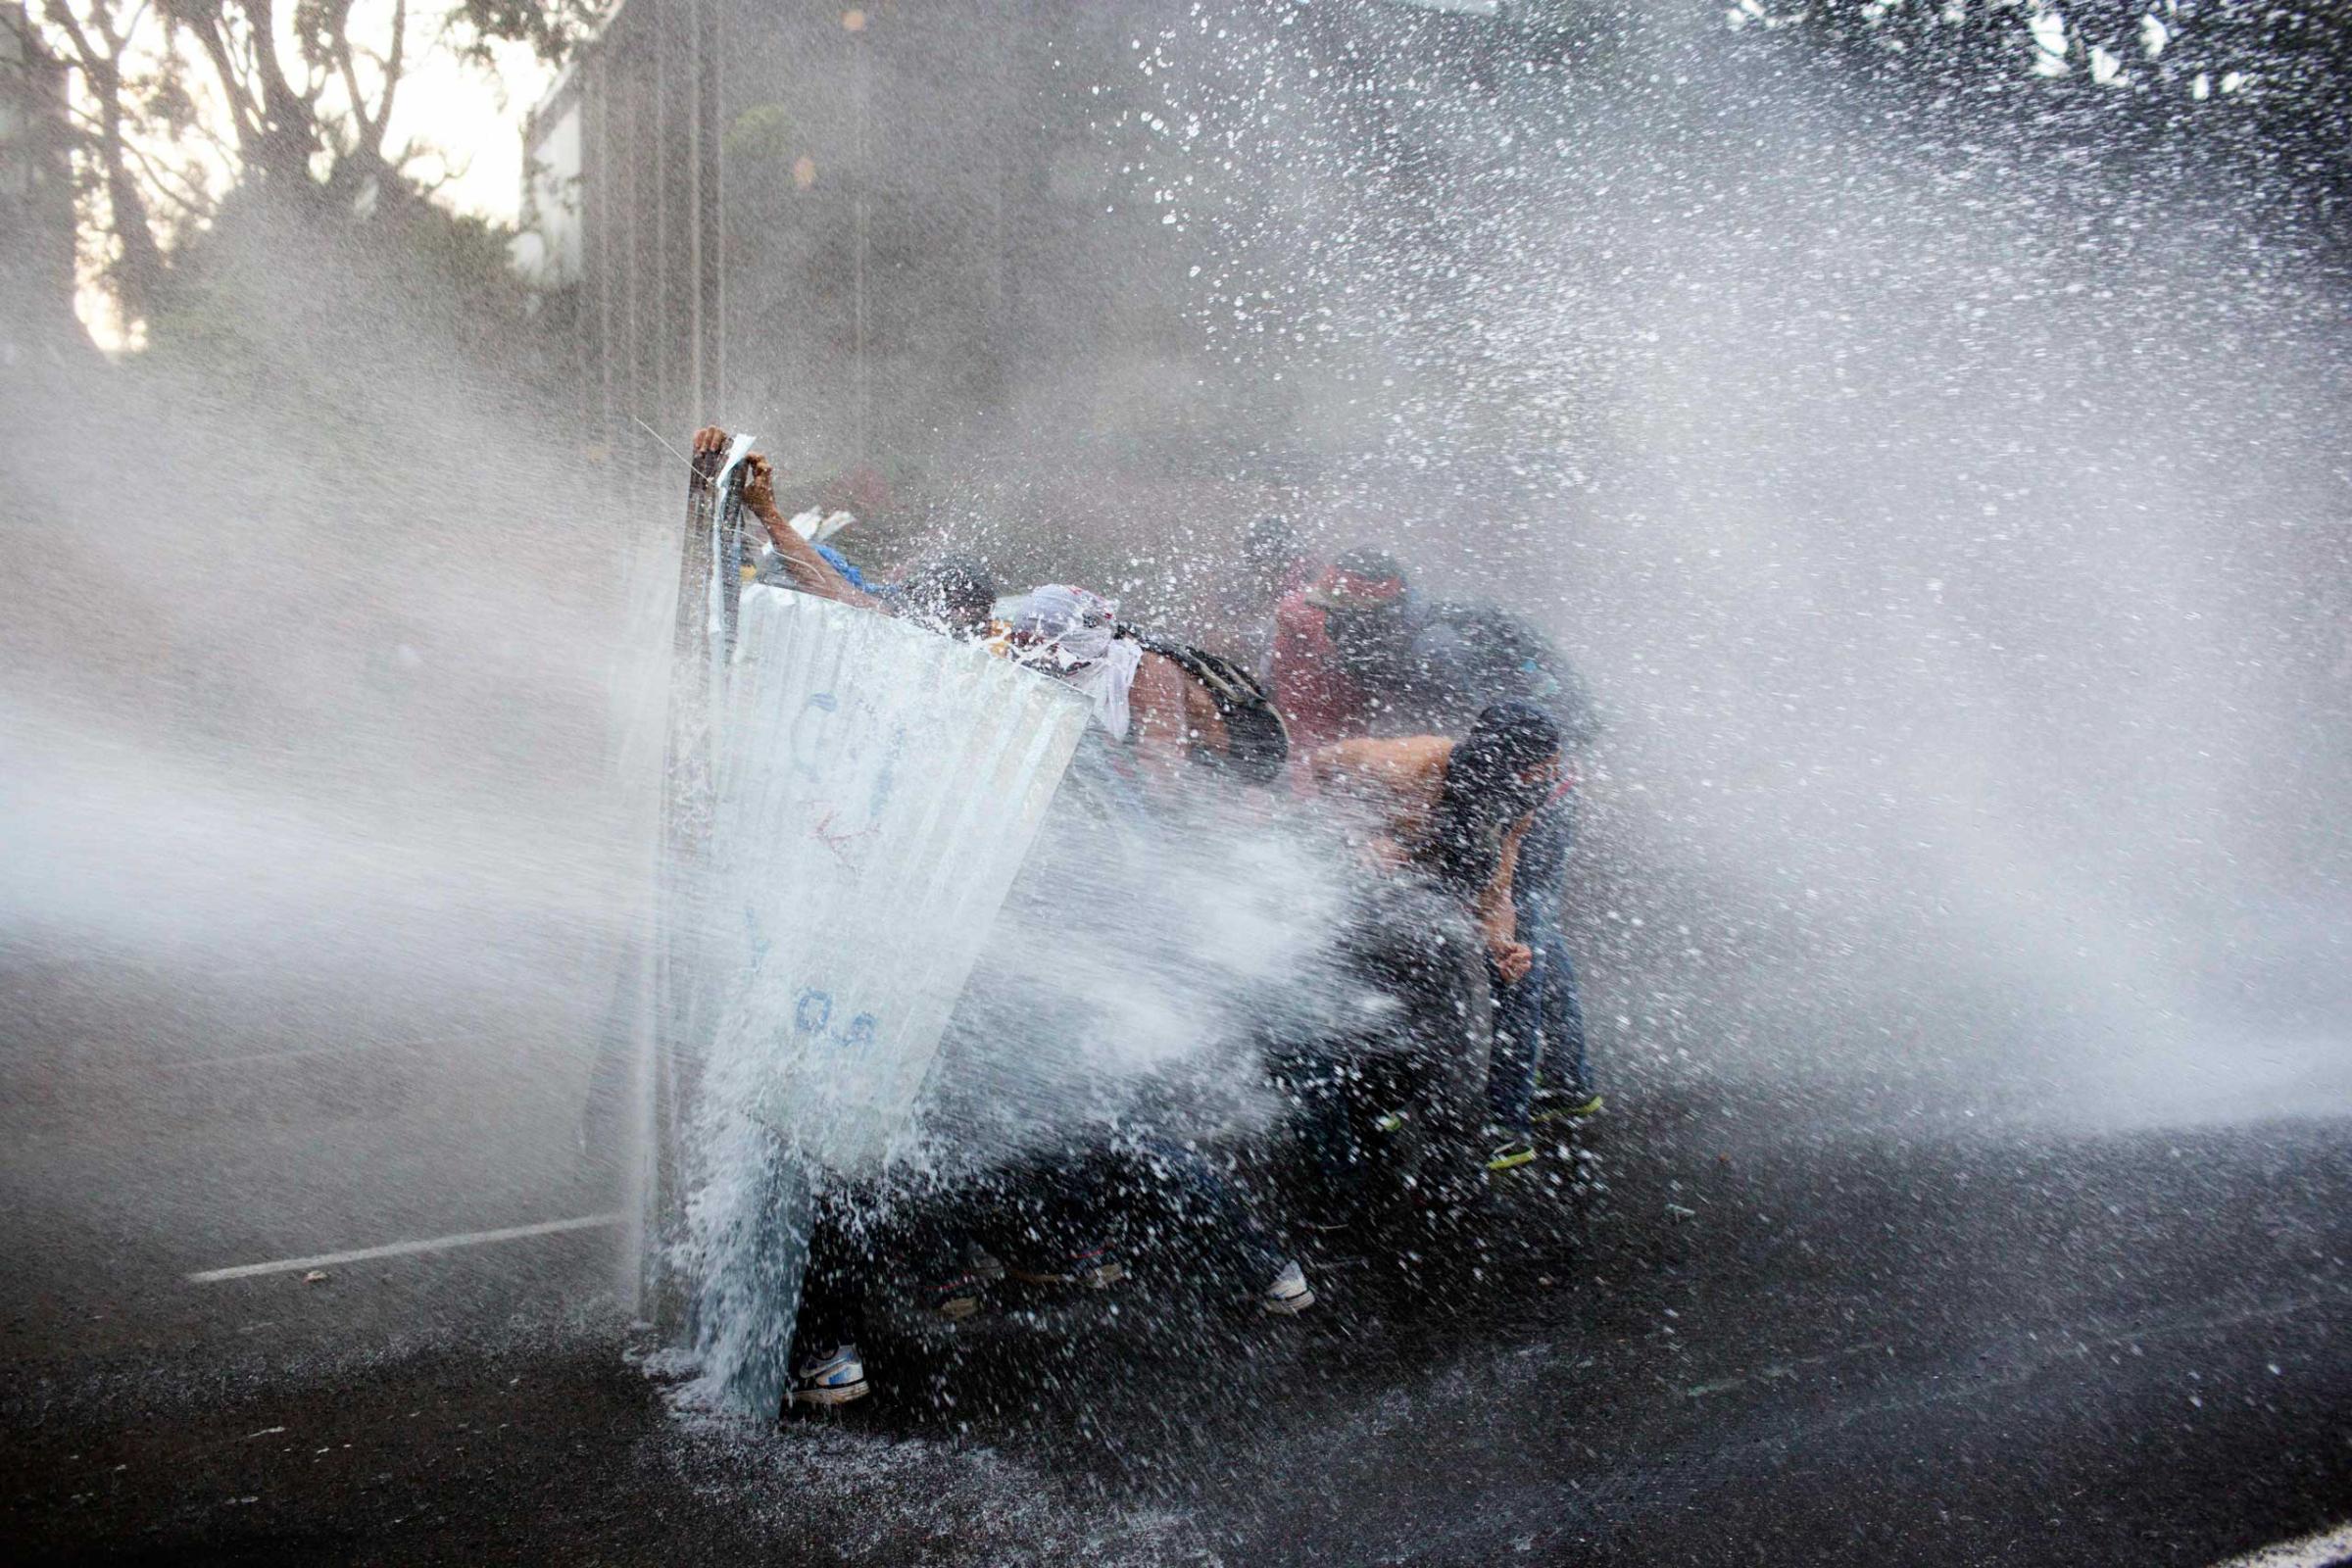 Anti-government demonstrators take cover from a police water cannon in Caracas, Venezuela, Feb. 28, 2014.